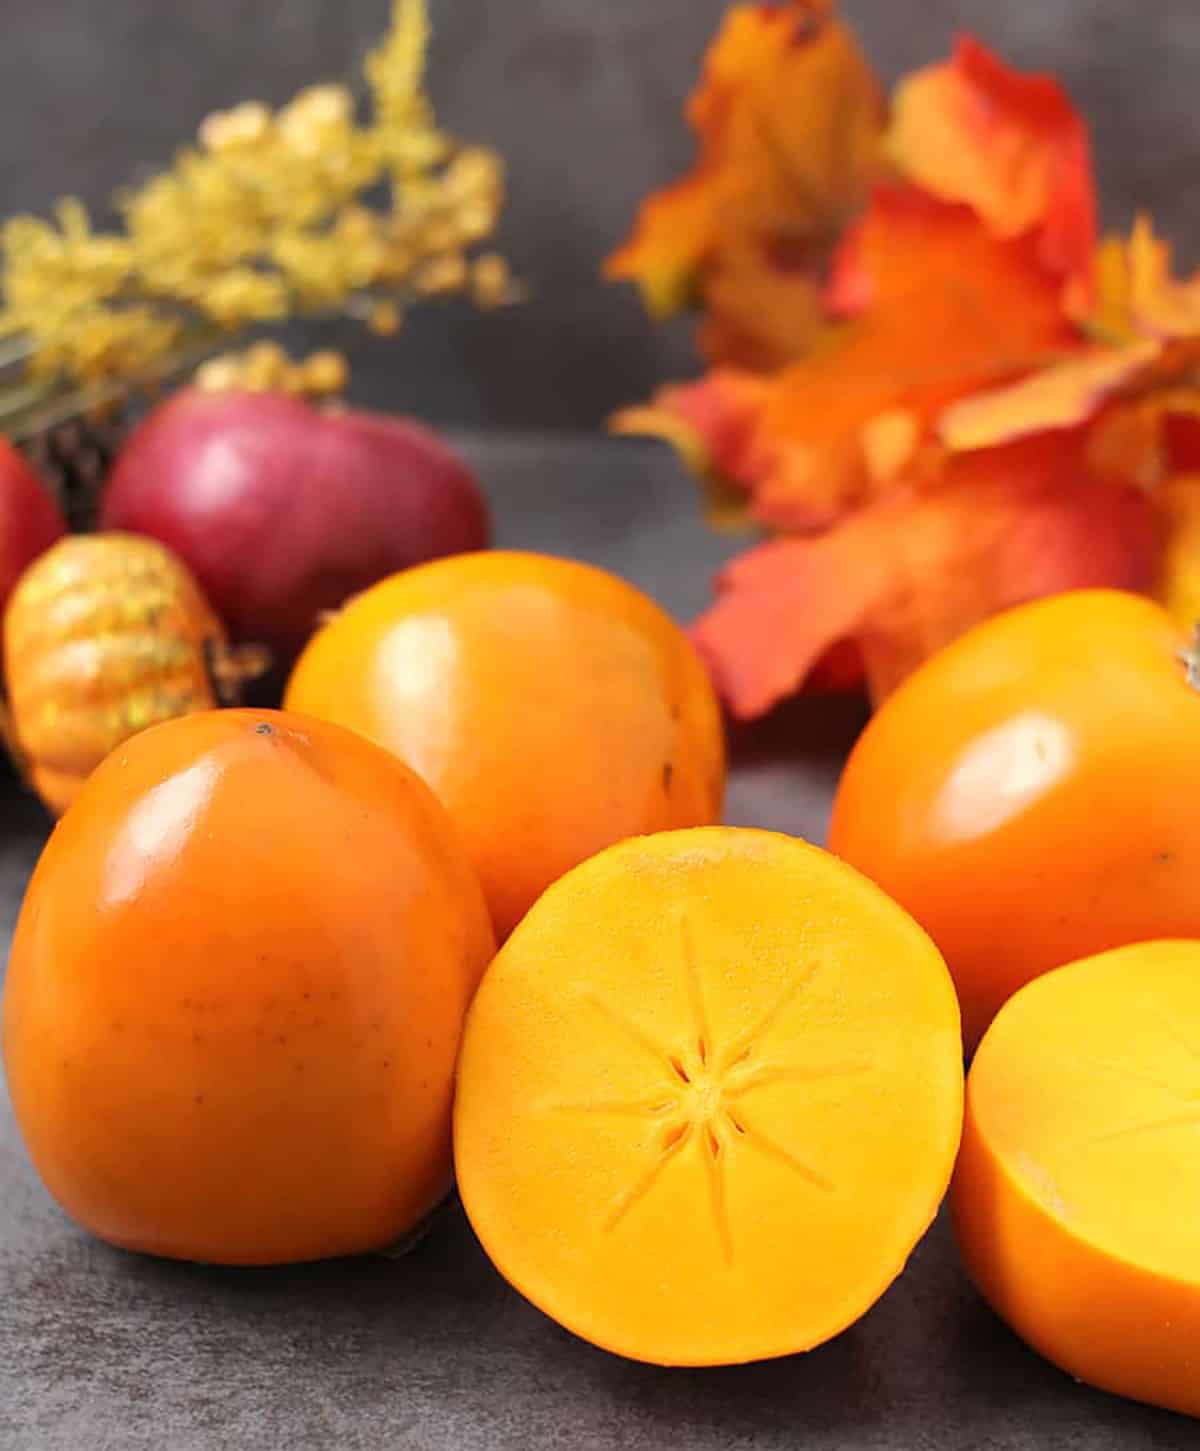 Picture of American persimmon fruit. 